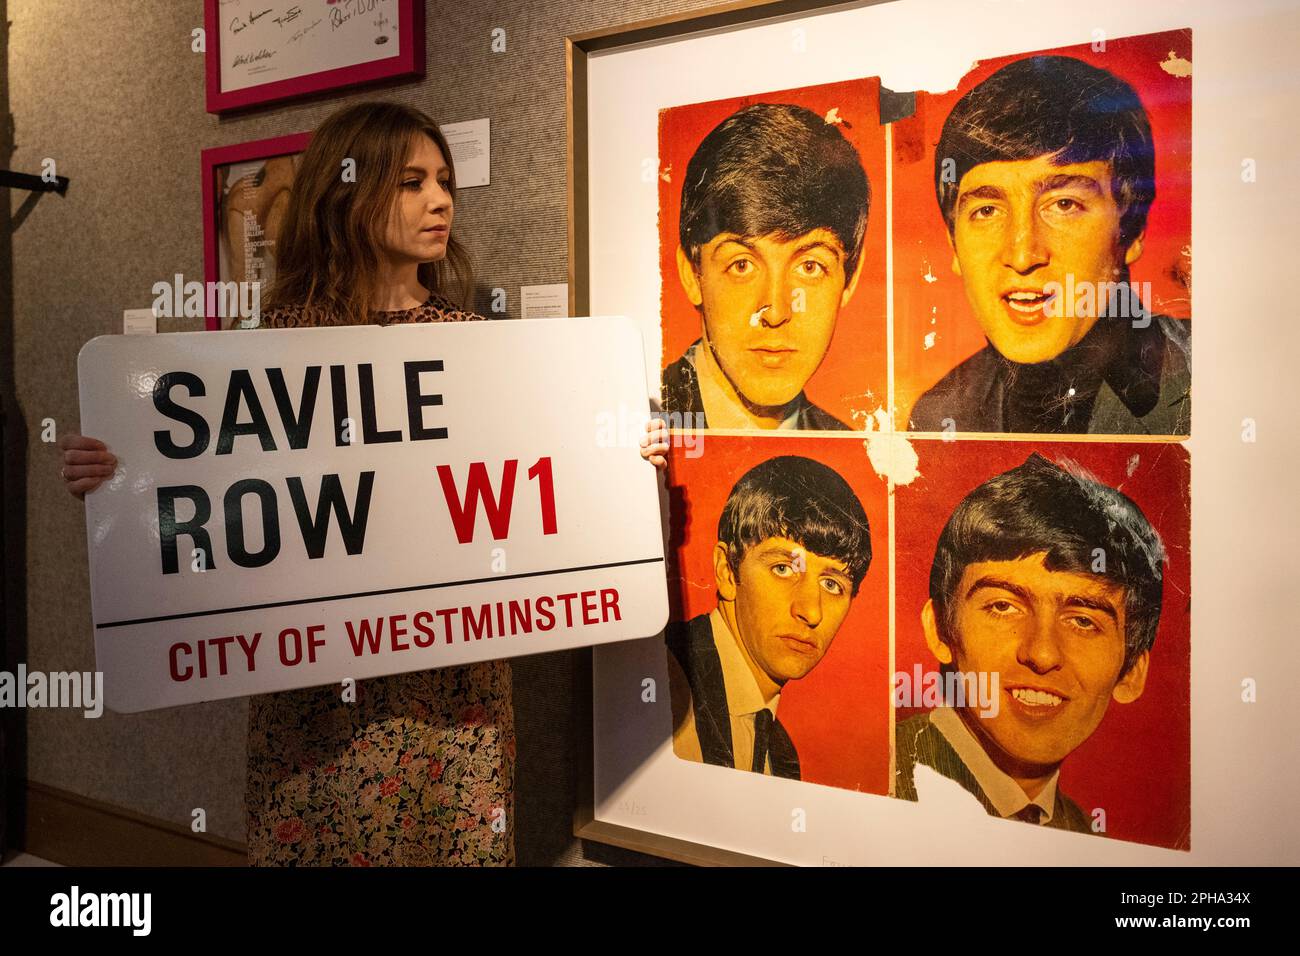 London, UK.  27 March 2023. A staff member holds “A Metal Street Sign For 'Savile Row' In London, Home of The Beatles' Apple Offices”, 1980s/90s, The Beatles (Est. £1,500 - £2,000) next to “Found Art - 'Beatles 62'”, 2012, by Peter Blake (Est. £2,500 - £3,500) at a preview of Bonham’s ‘British. Cool.’ sale.  British art, prints, fashion, photographs and popular culture memorabilia will be offered for sale at Bonham’s New Bond Street galleries on 29 March  Credit: Stephen Chung / Alamy Live News Stock Photo